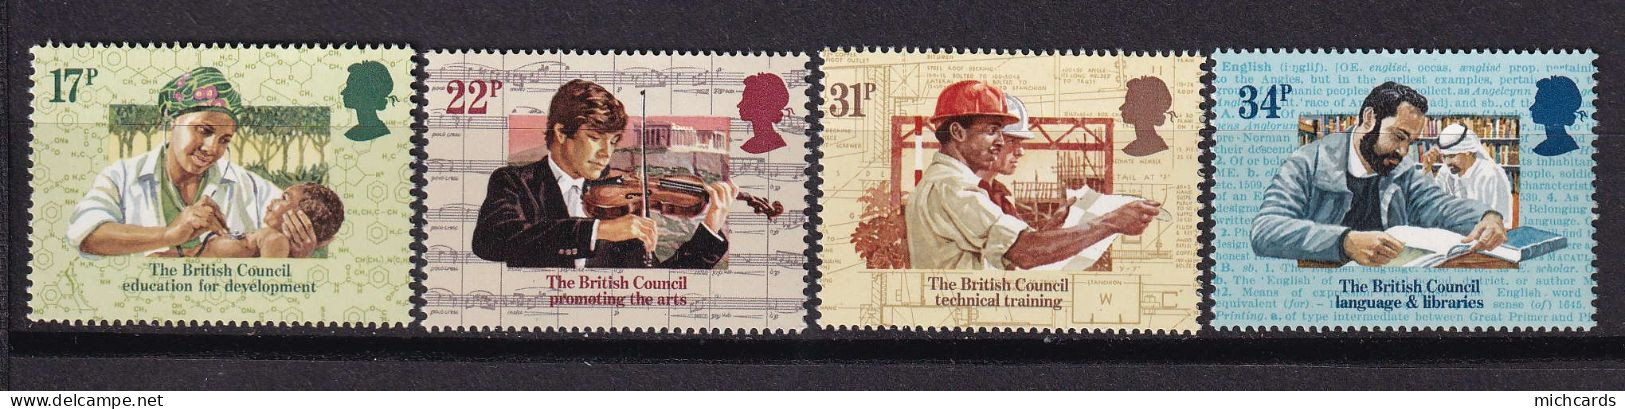 196 GRANDE BRETAGNE 1984 - Y&T 1146/49 - Education Musique Construction Bibliotheque - Neuf ** (MNH) Sans Charniere - Unused Stamps